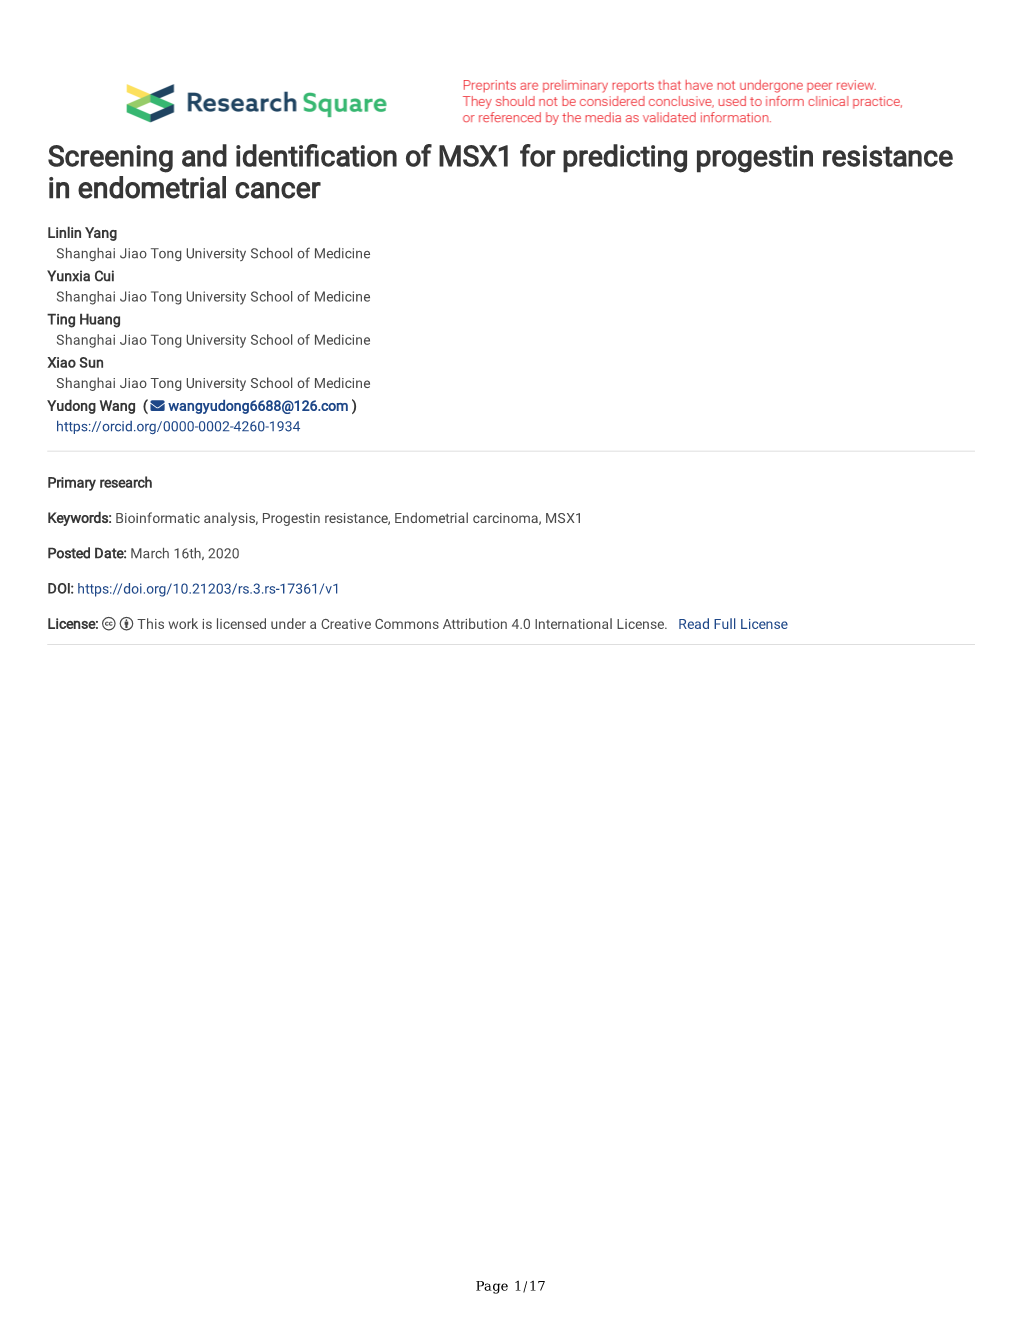 Screening and Identification of MSX1 for Predicting Progestin Resistance